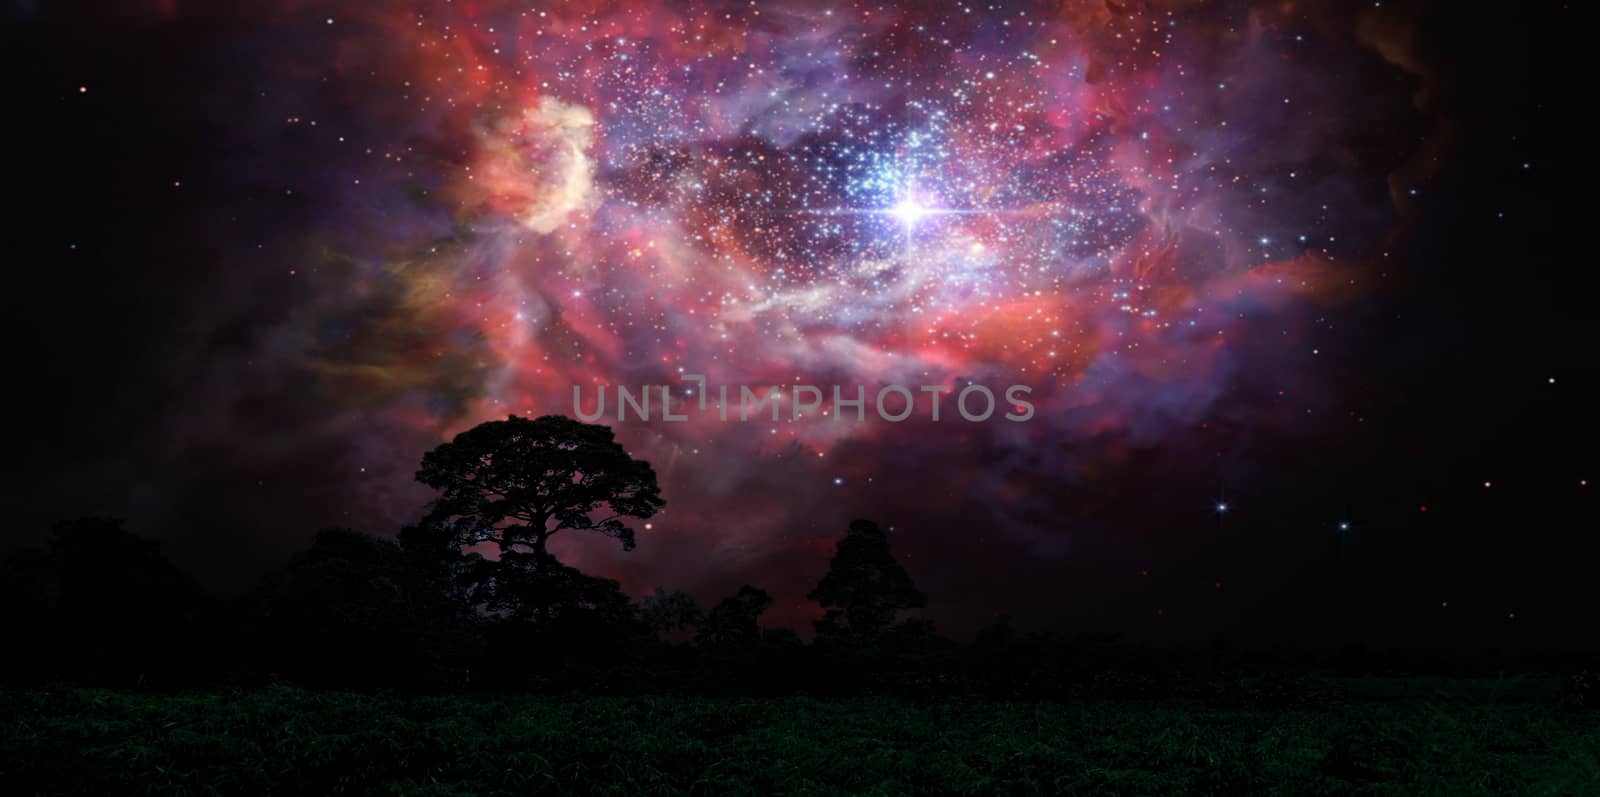 blur ancient stardust nebula back on night cloud sunset sky over silhouette forest, Elements of this image furnished by NASA